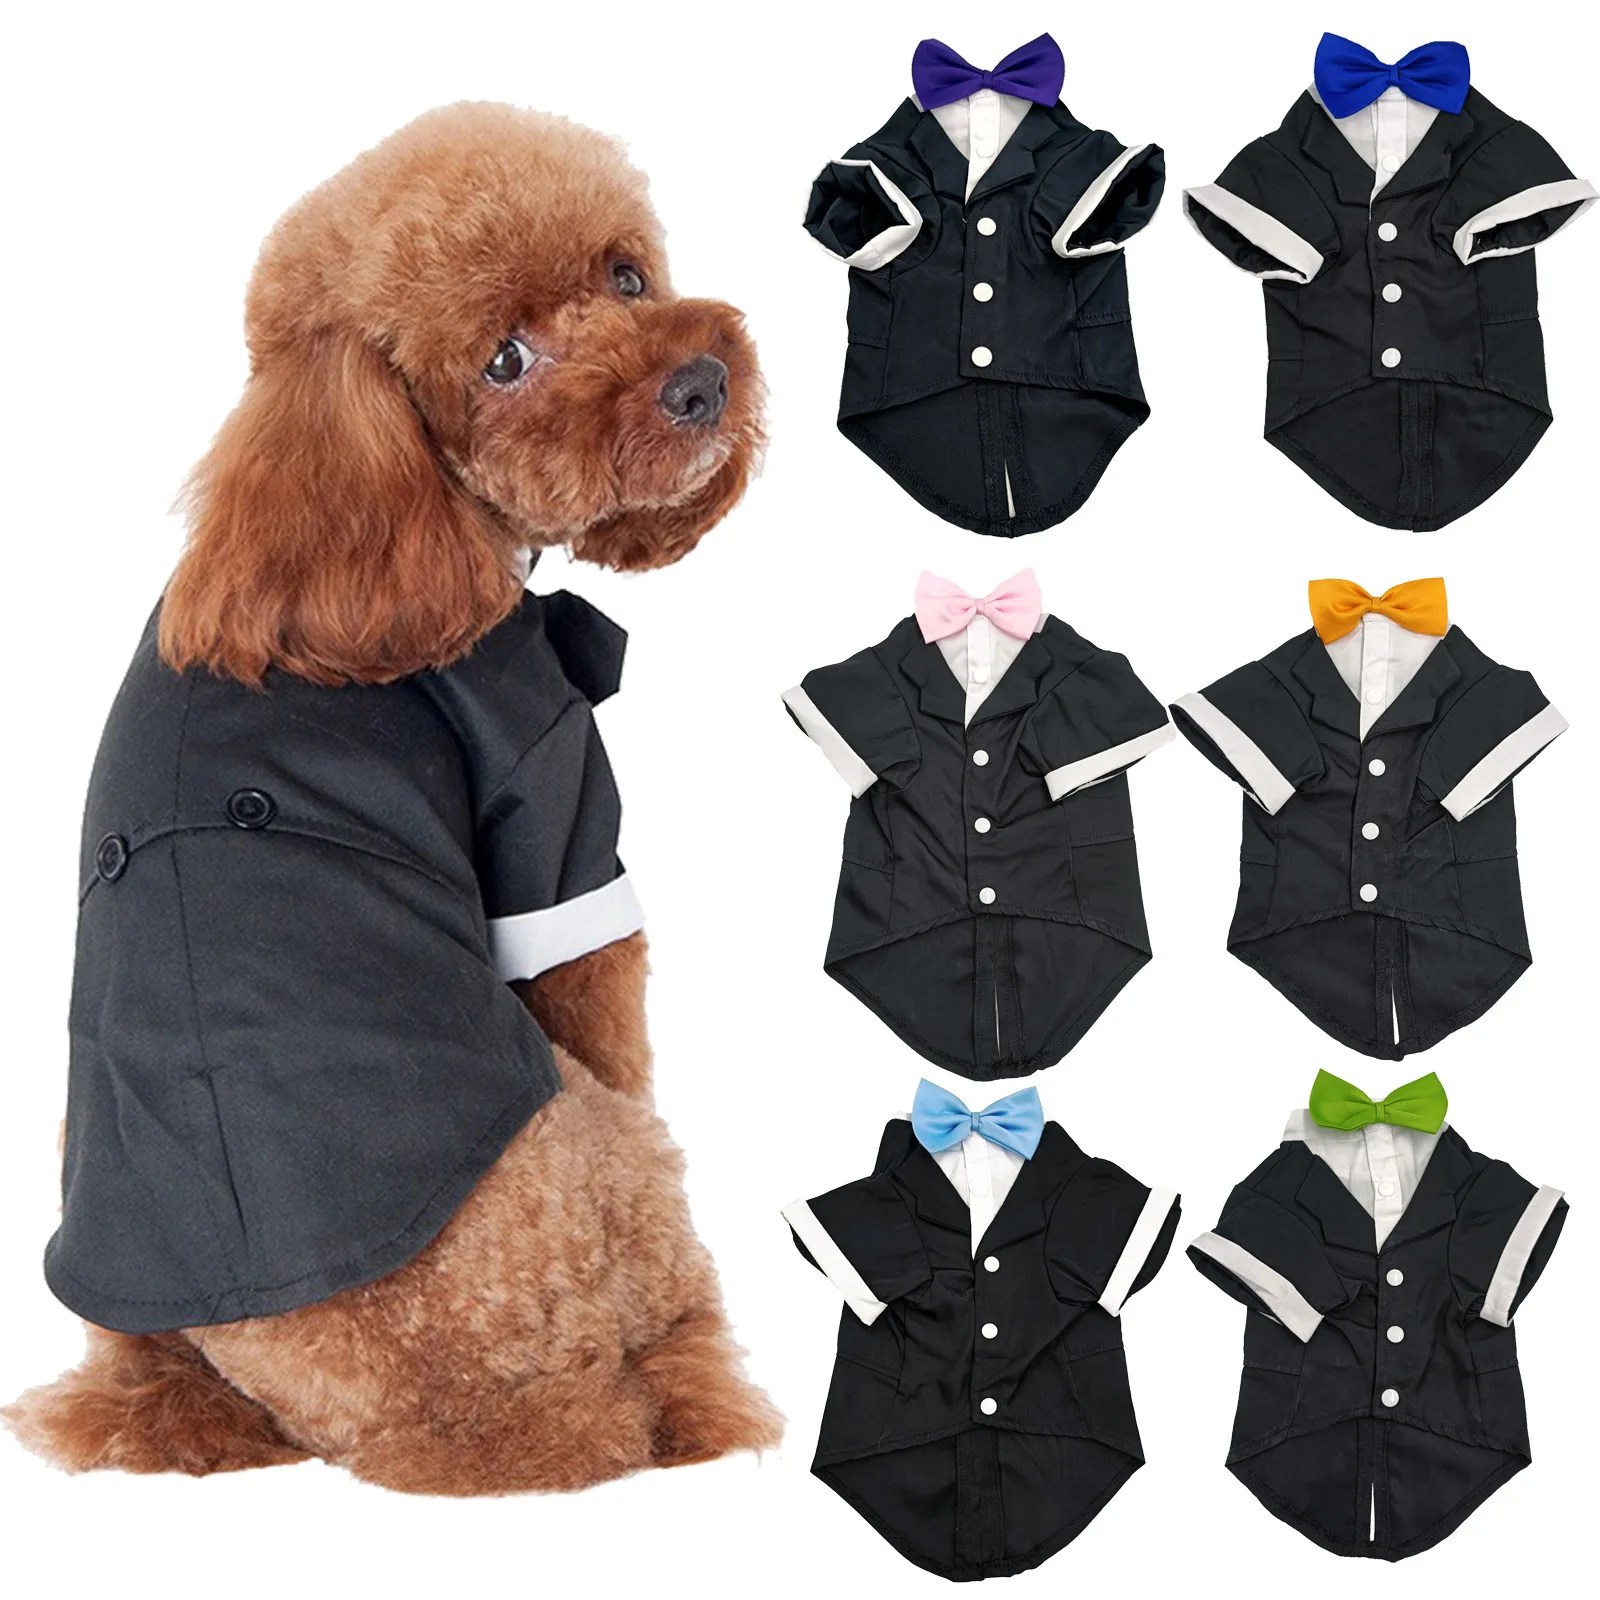 Dog Tuxedo Dog Suit Puppy Pet Tuxedo Wedding Party Costume Dog Prince Bow Tie Shirt Formal Dog Weeding Attire Dogs Cats Clothes